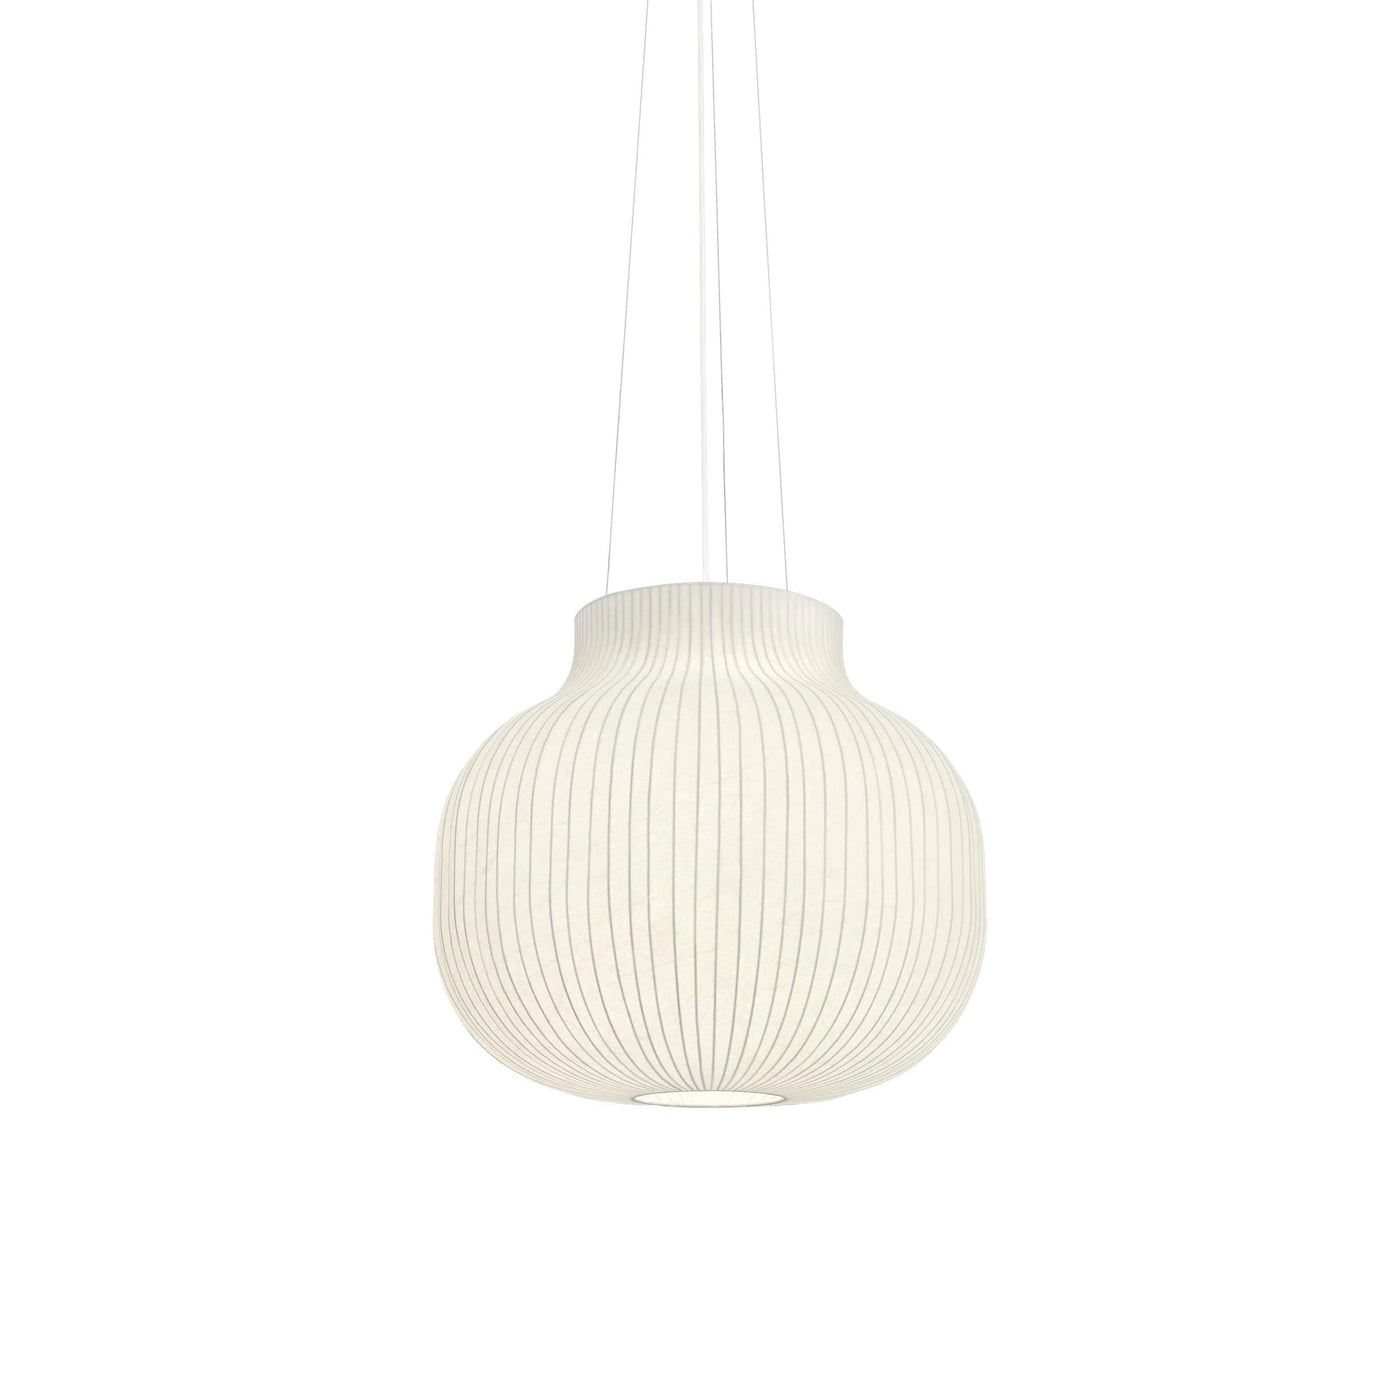 Muuto Ø60 closed ceiling pendant, available from someday designs